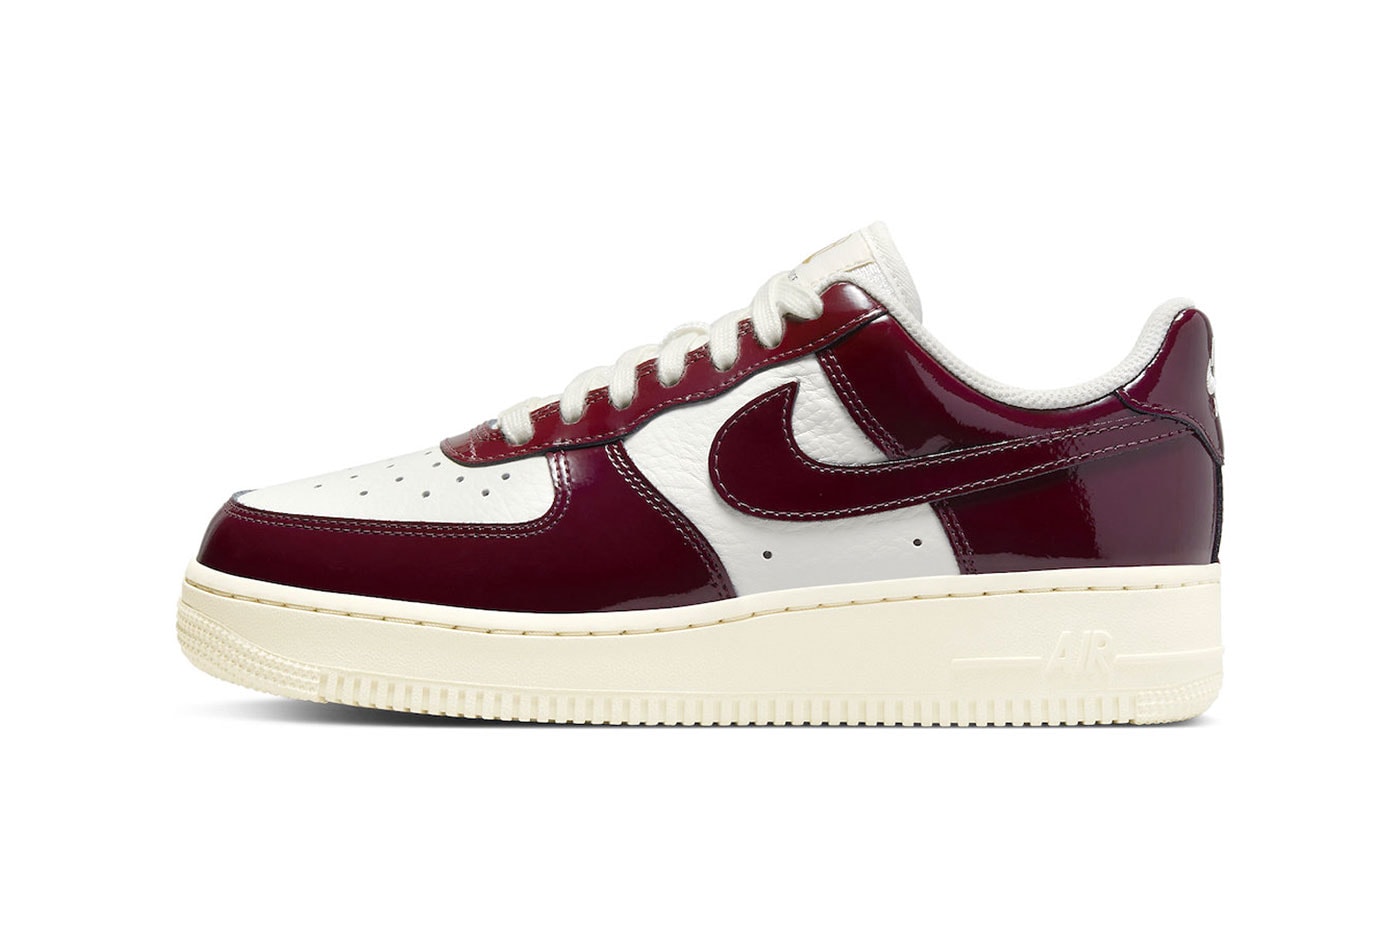 Nike Air Force 1 Low Ancient Rome Release Info dq8583 100 roman empire bust gold figurehead burgundy patent leather white yellowed aged sole unit release date info price